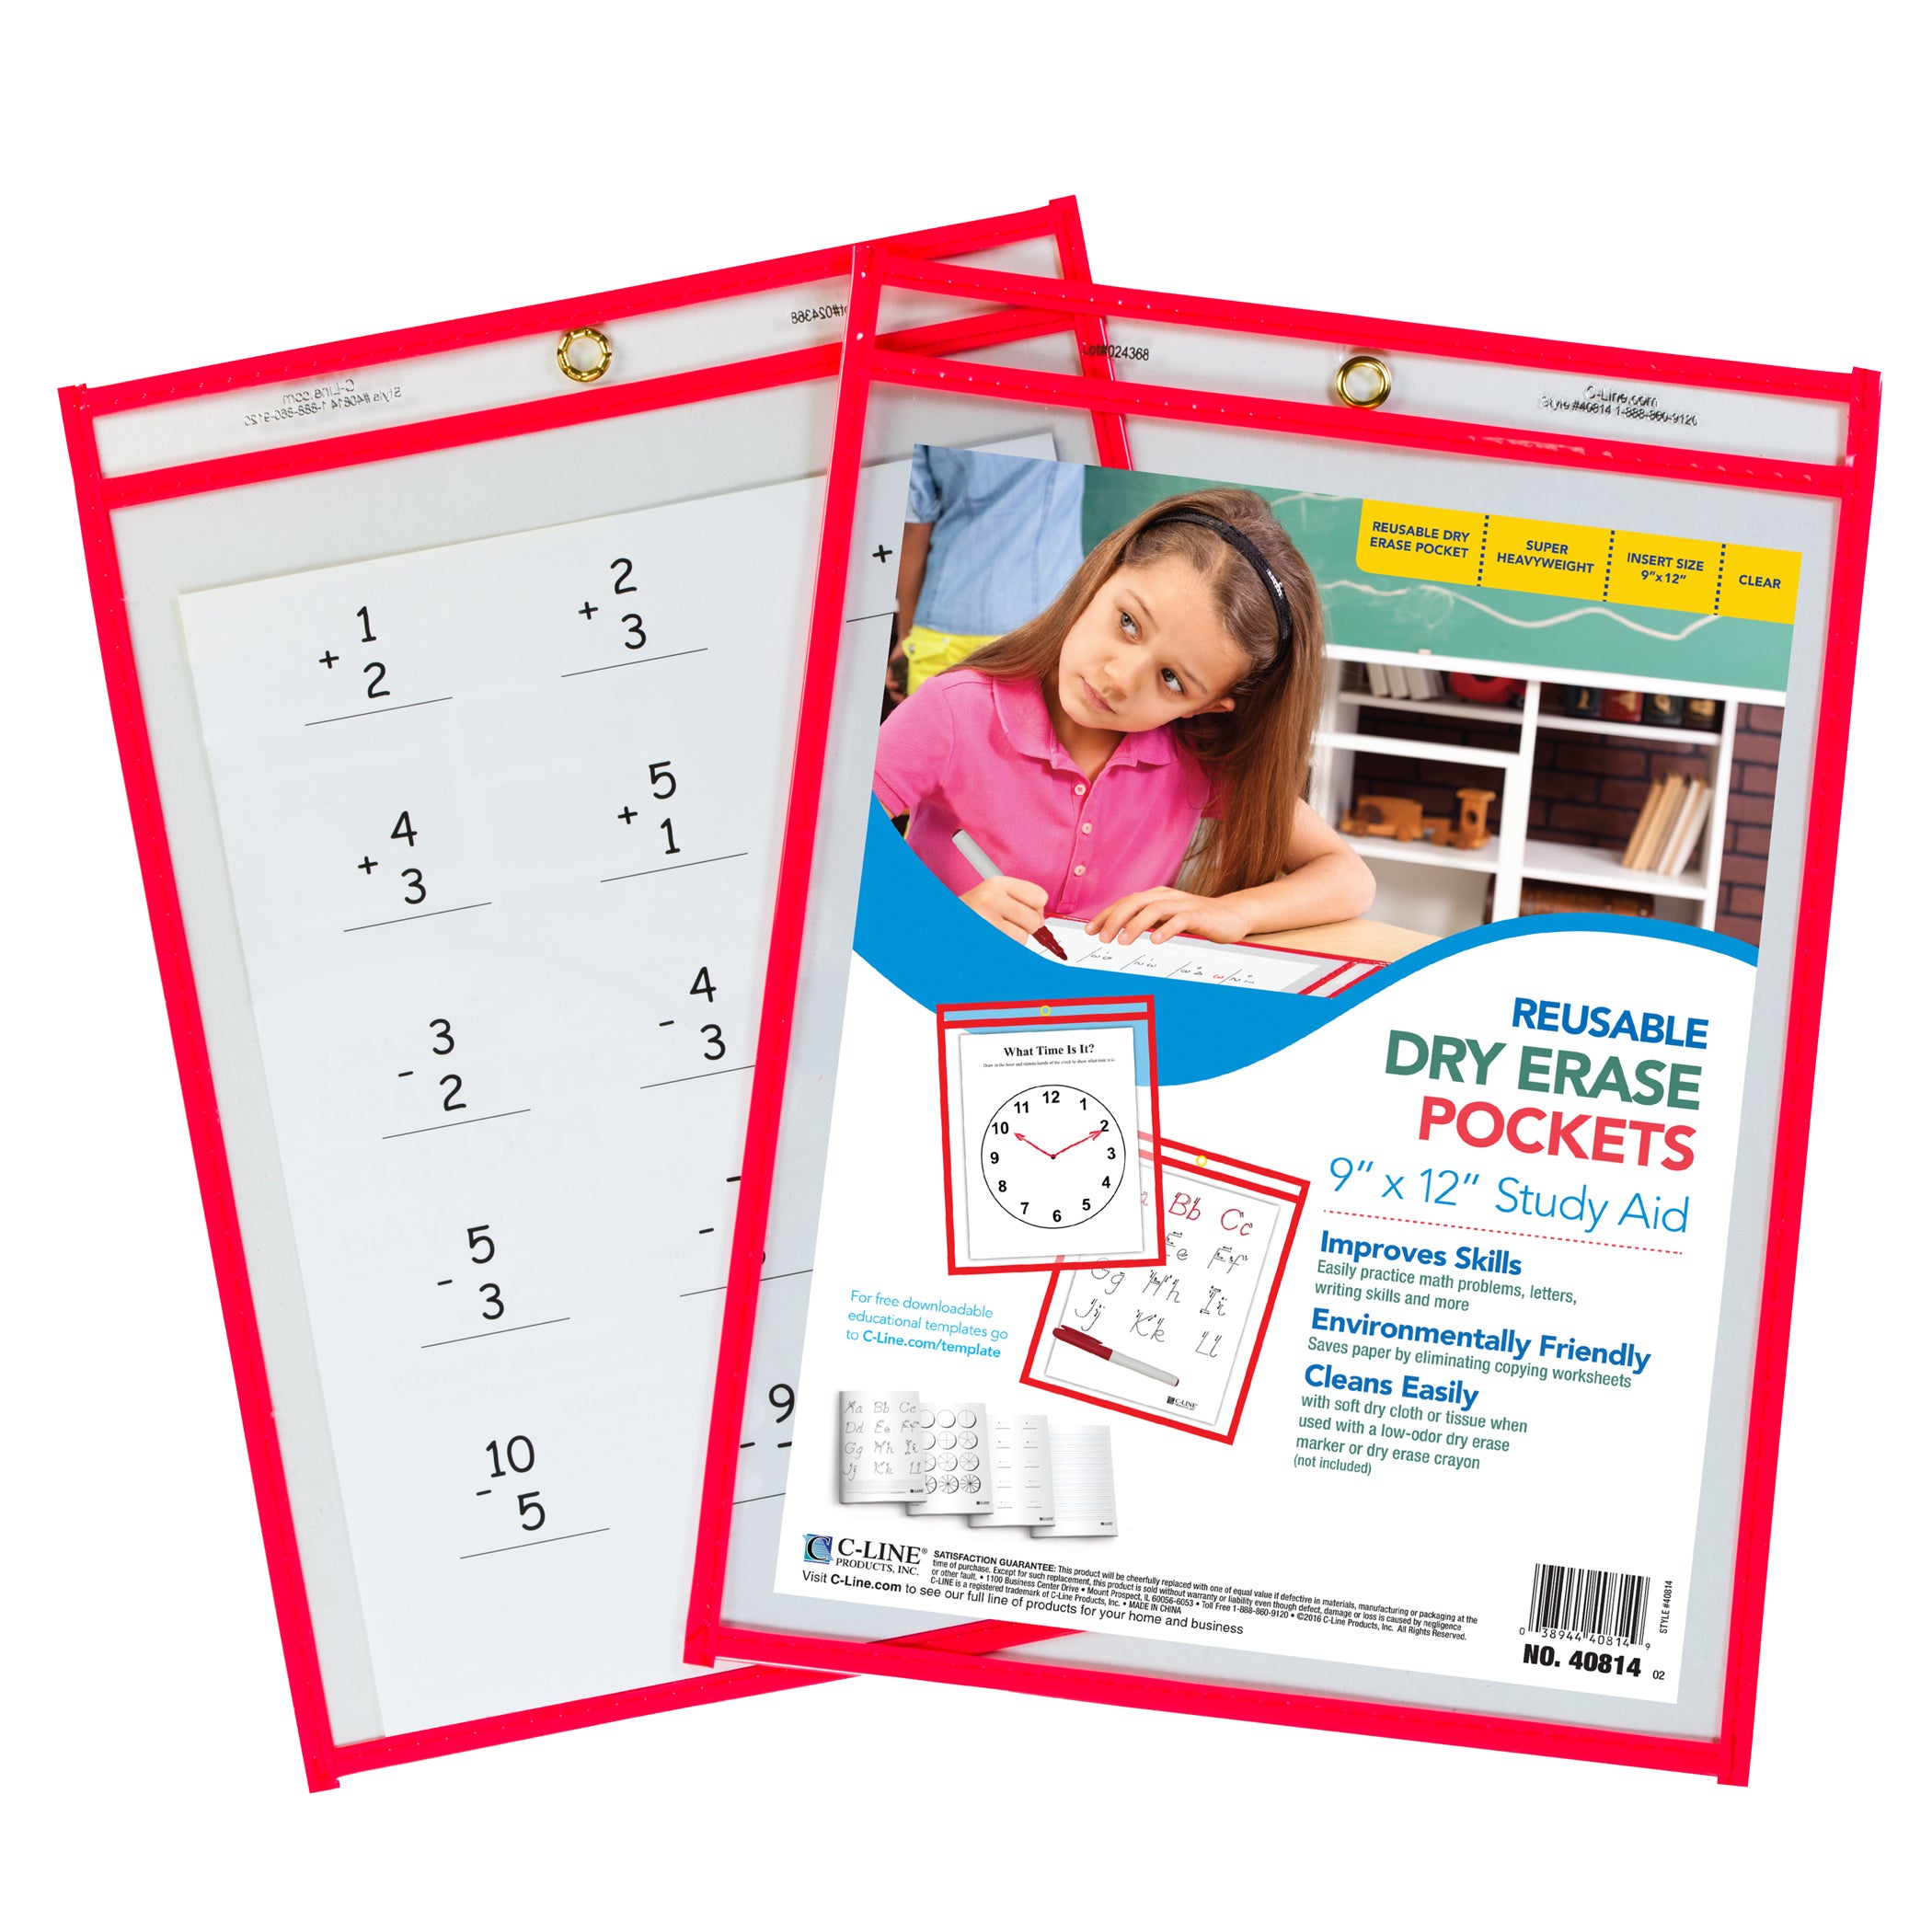 Reusable Dry Erase Pocket - Study Aid, Neon Red, 9" x 12", Pack of 10 - A1 School Supplies